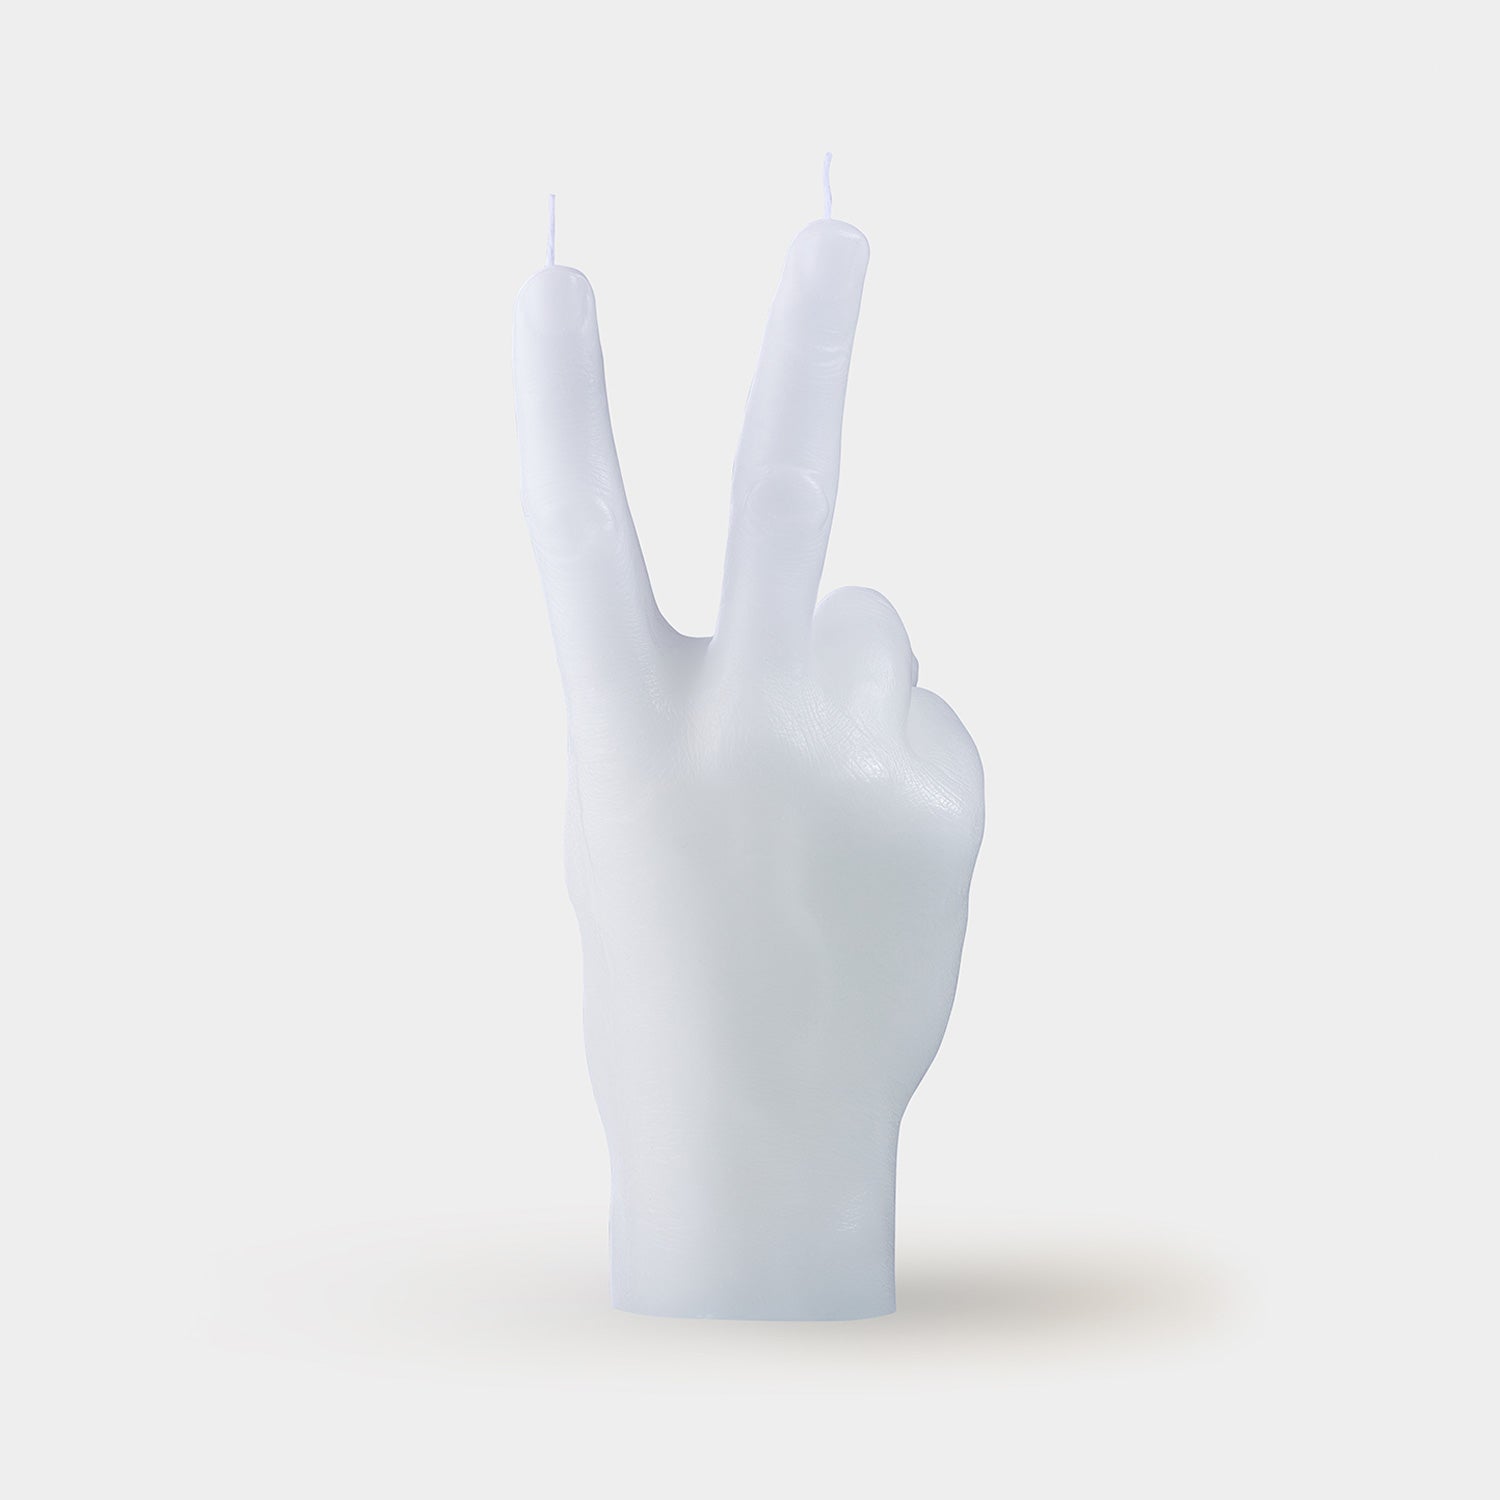 CandleHand "Peace" Candle - White